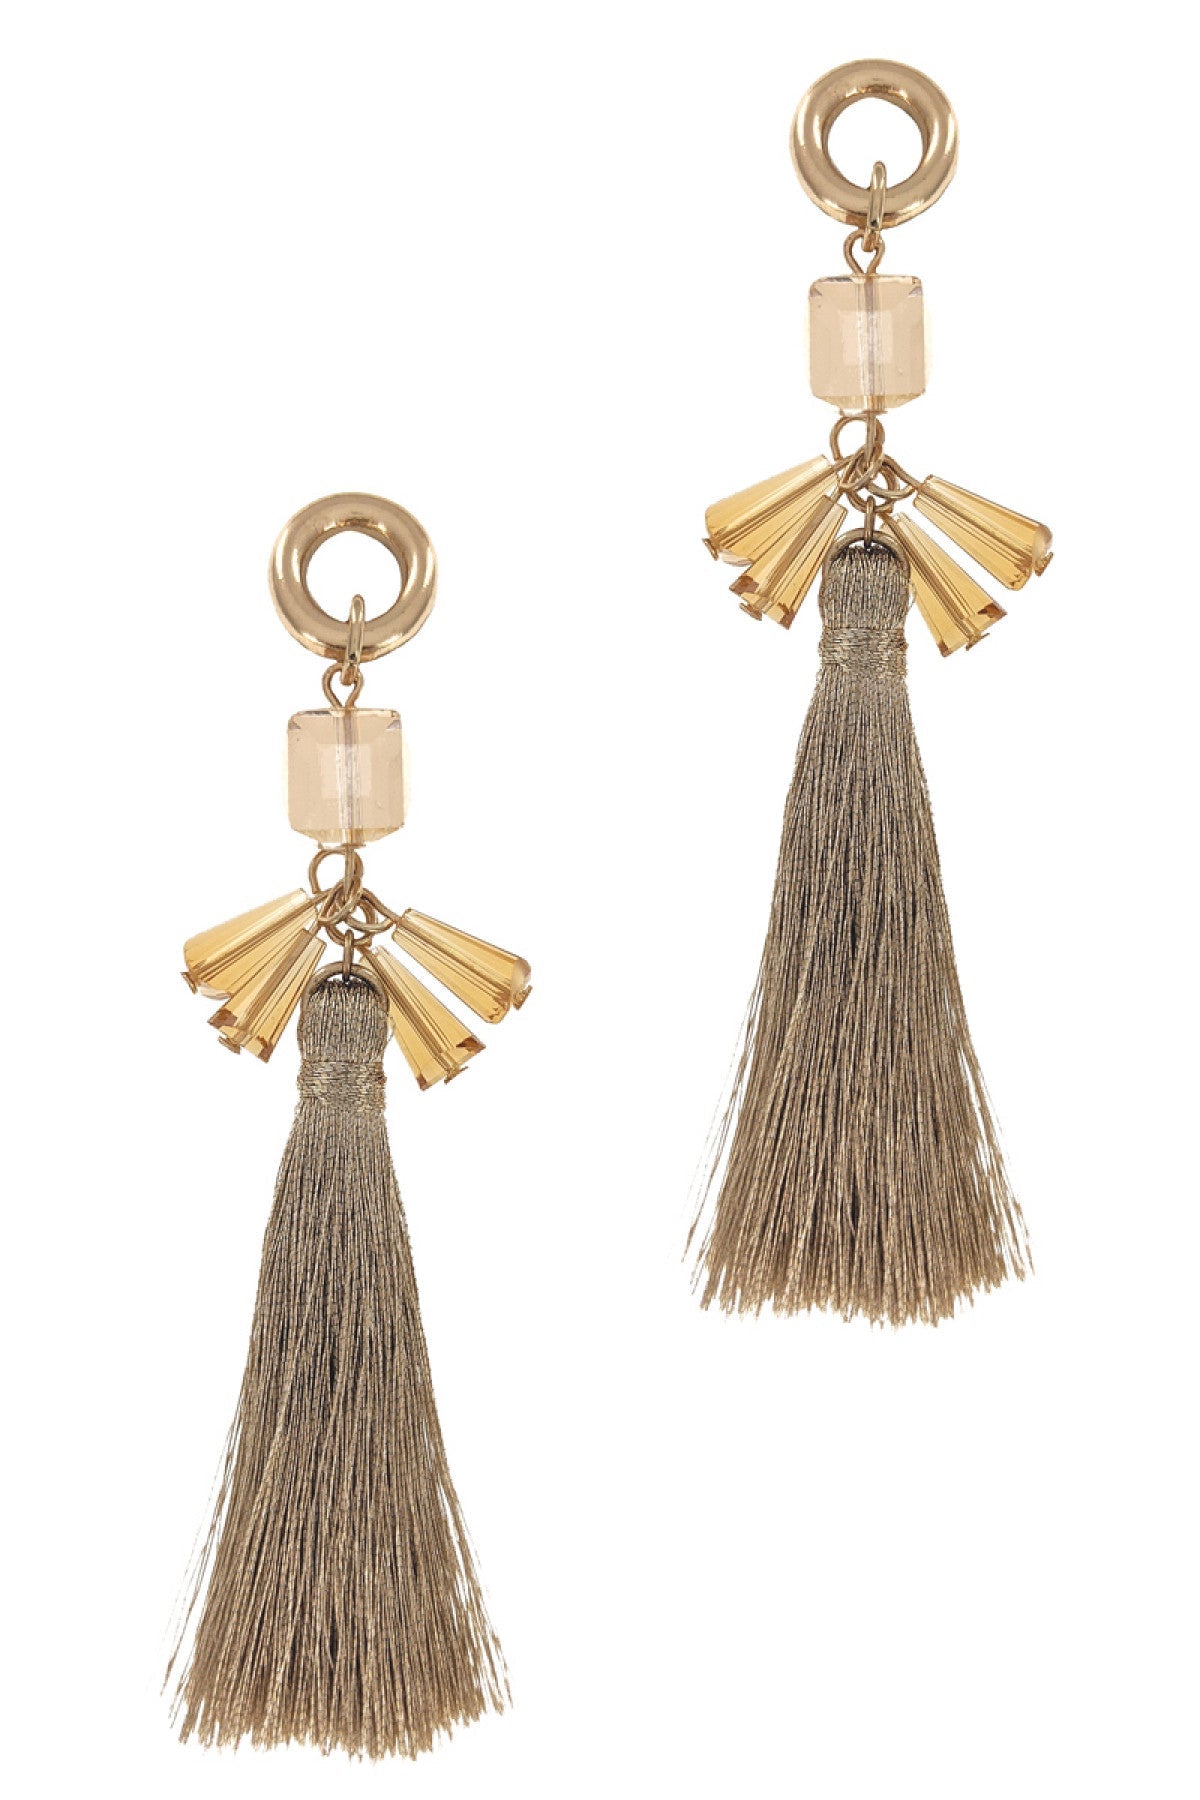 GOLD TASSEL WITH BEADS FASHION EARRINGS/3PAIRS